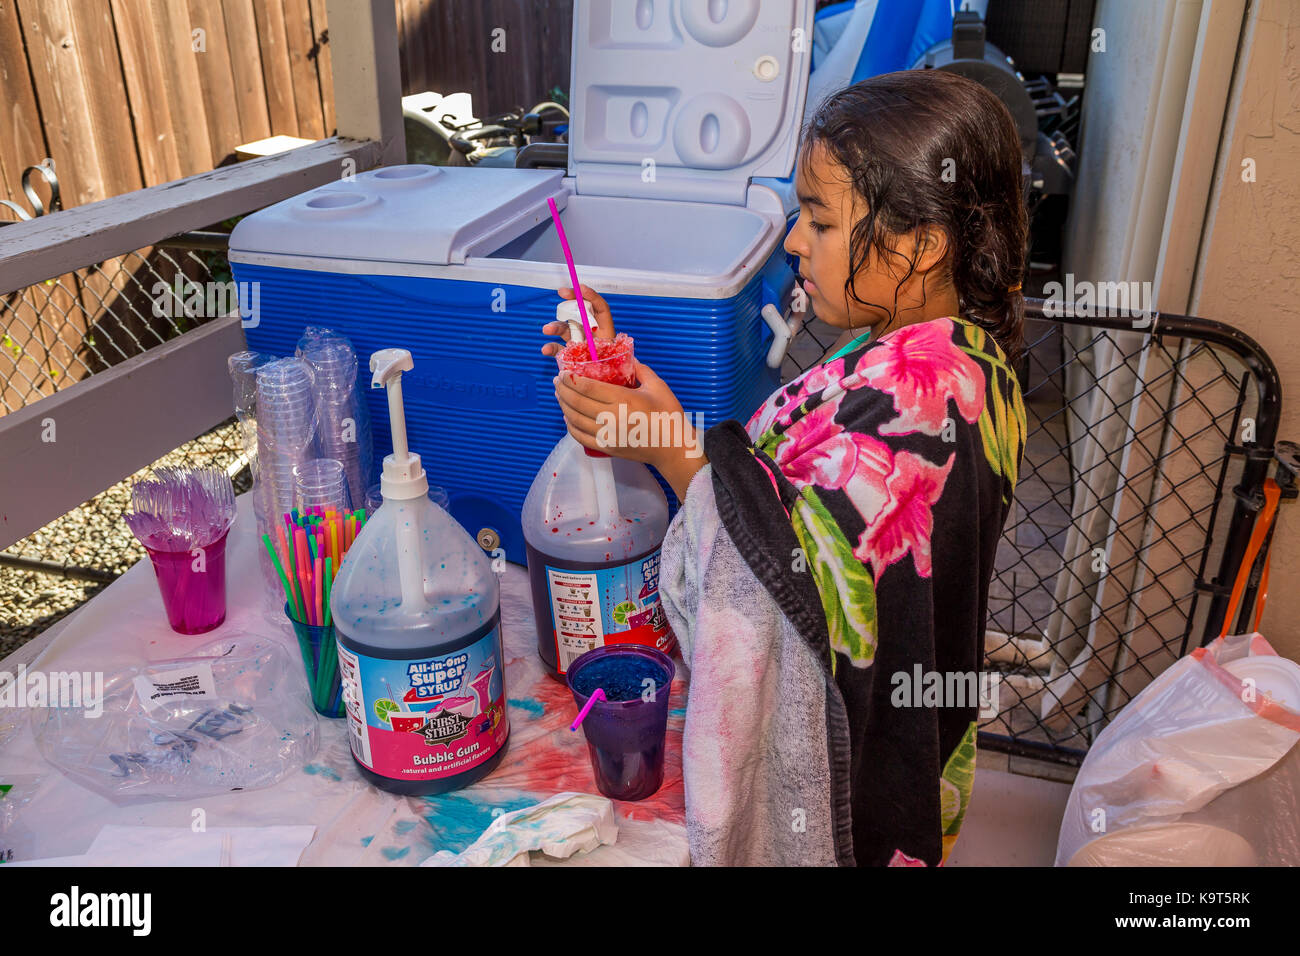 Hispanic girl, young girl, girl, making cherry flavored snow cone, pool party, Castro Valley, Alameda County, California, United States, North America Stock Photo